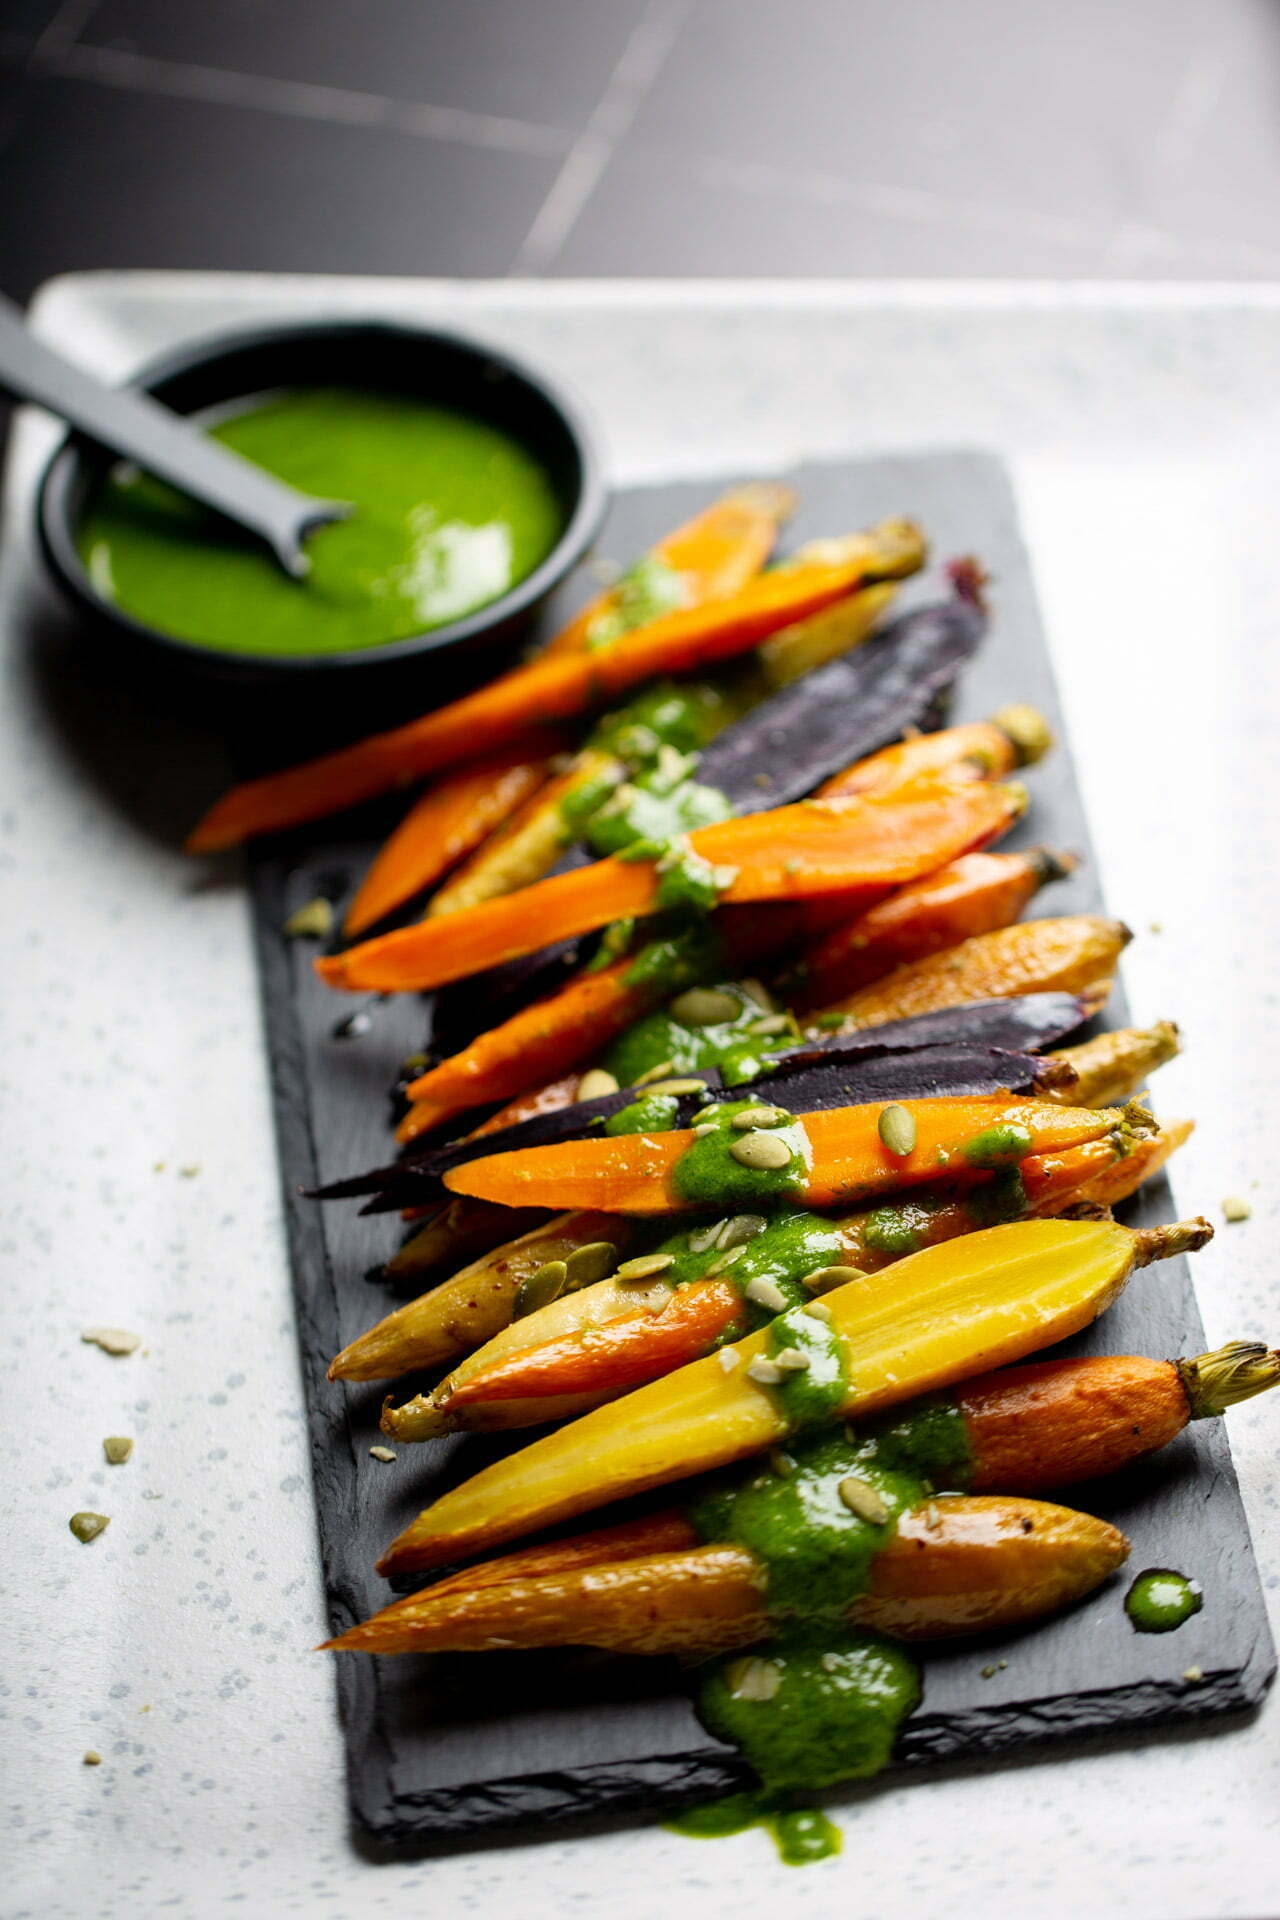 Roasted carrots with a green sauce on a slate plate.